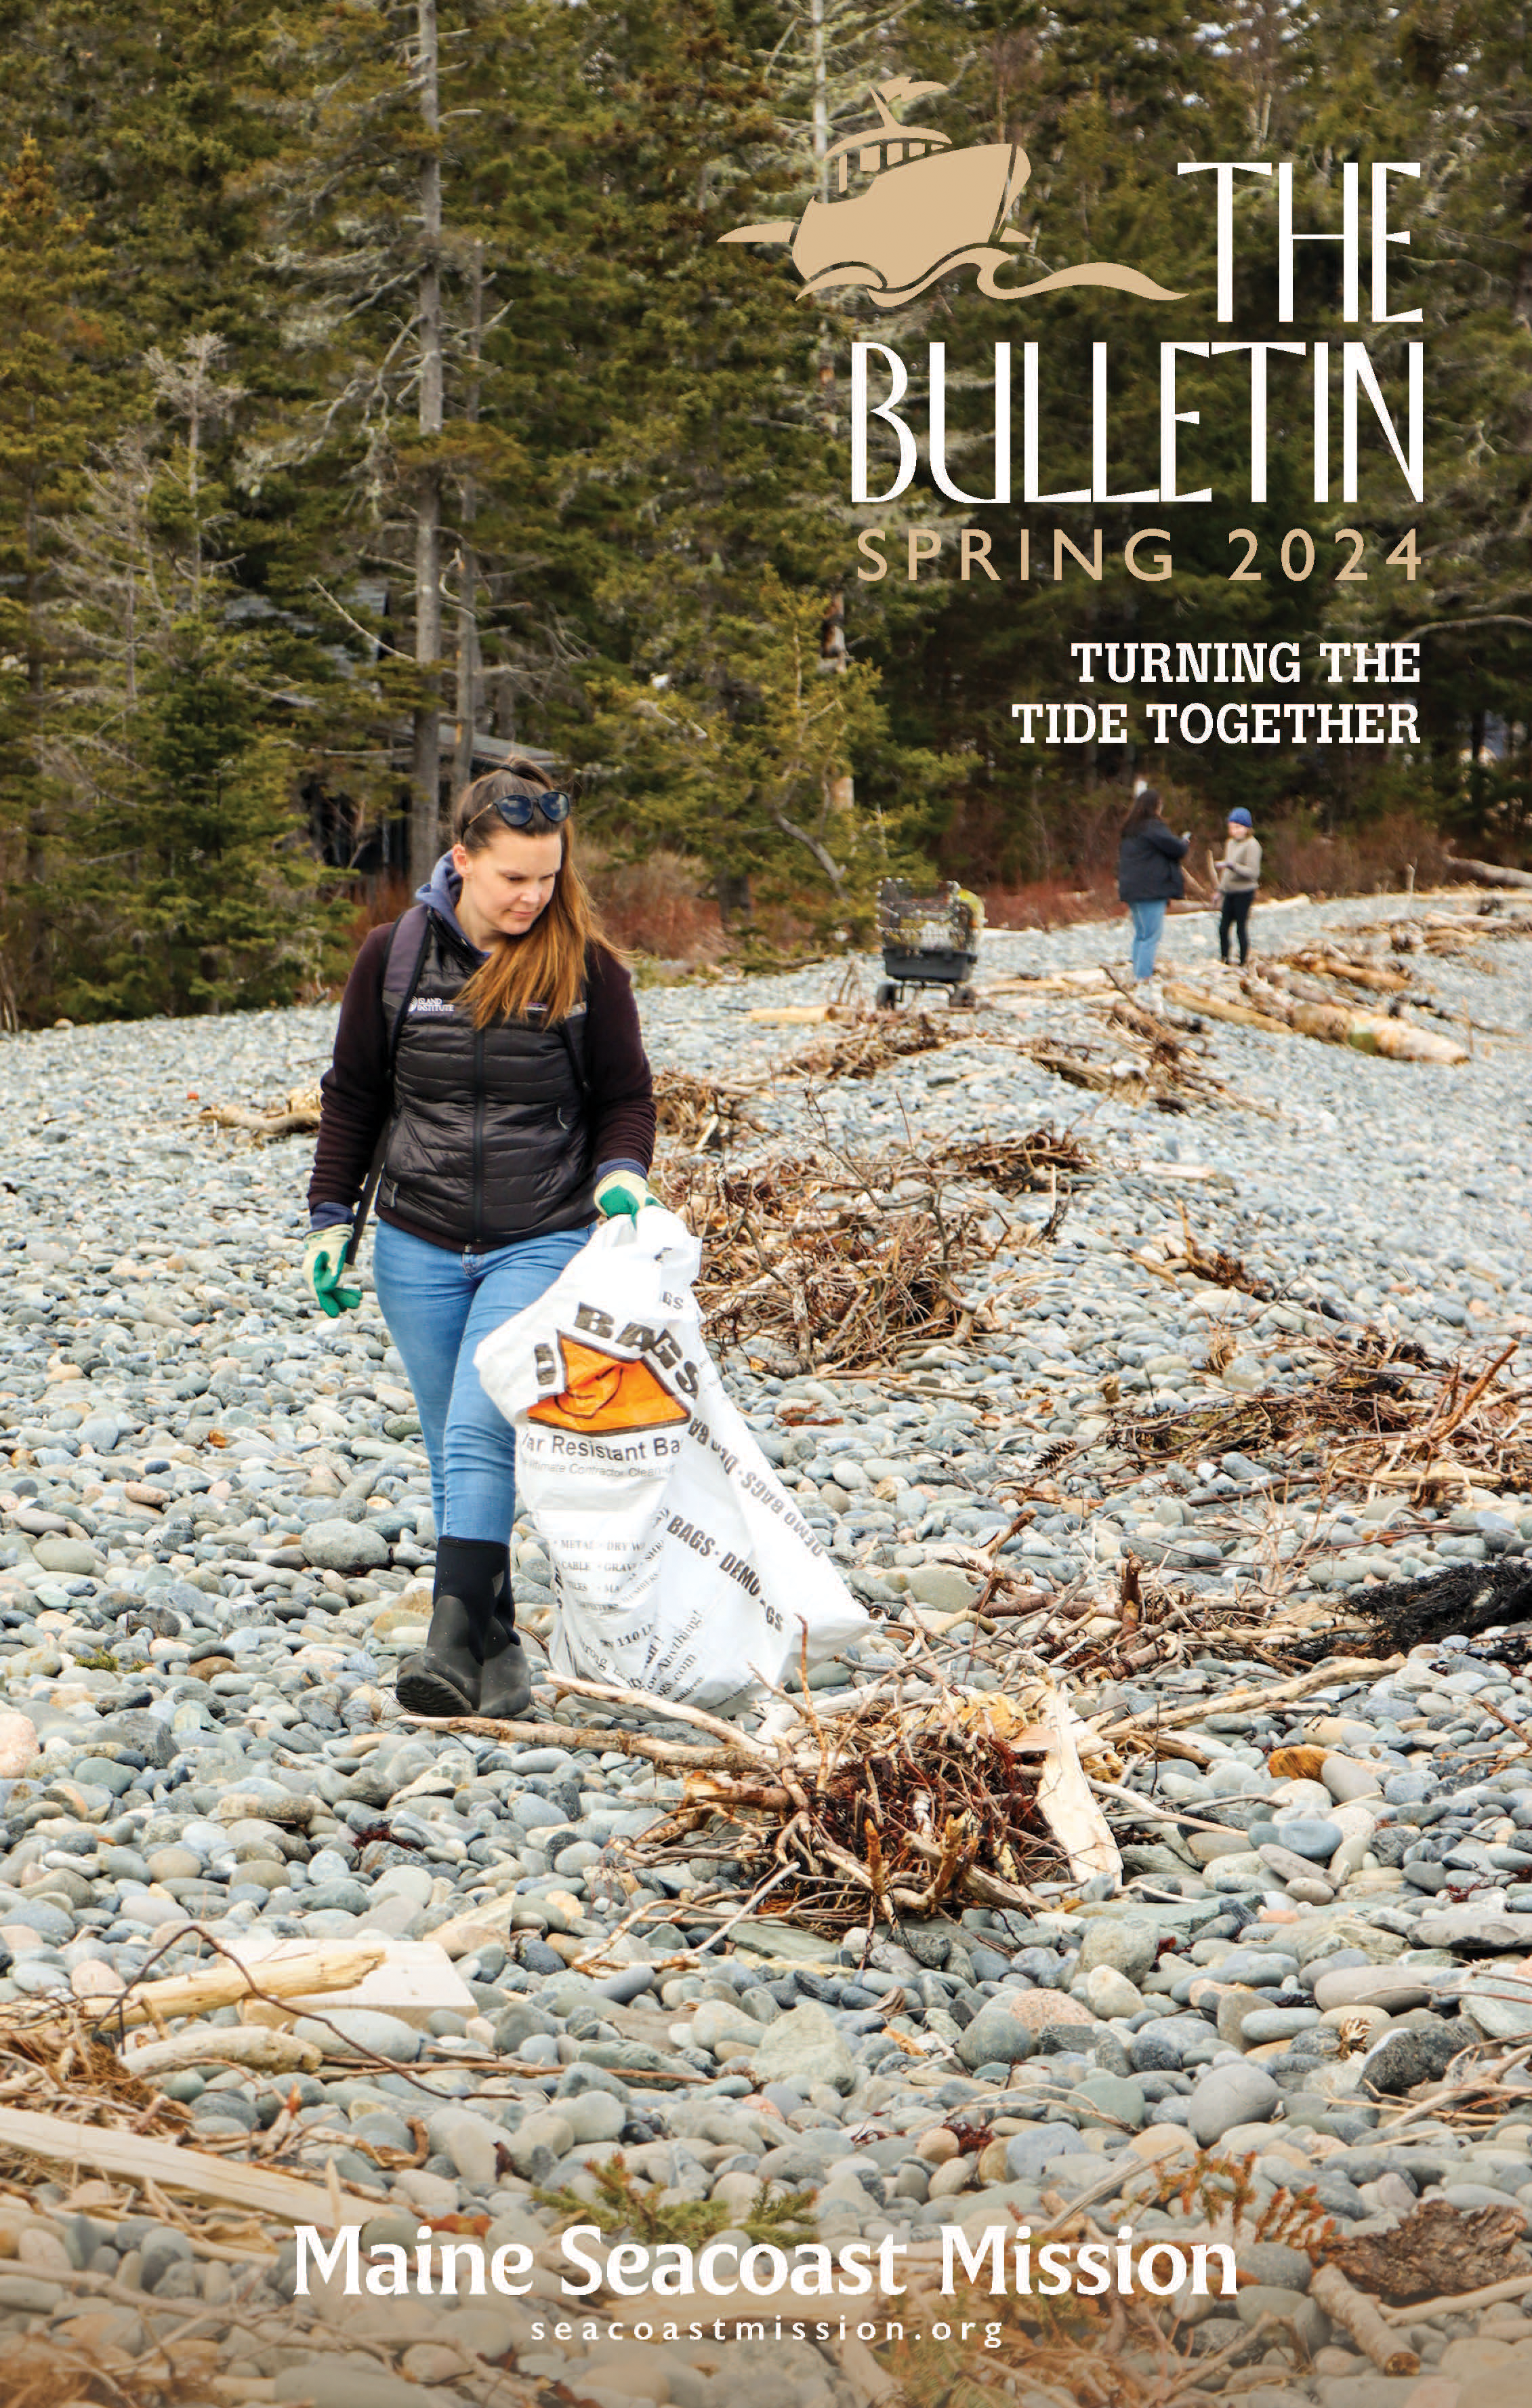 The cover of "The Bulletin" Spring 2024 that reads "Turning the Tide Together" with a photo of a person with a trash bag walking on a beach.